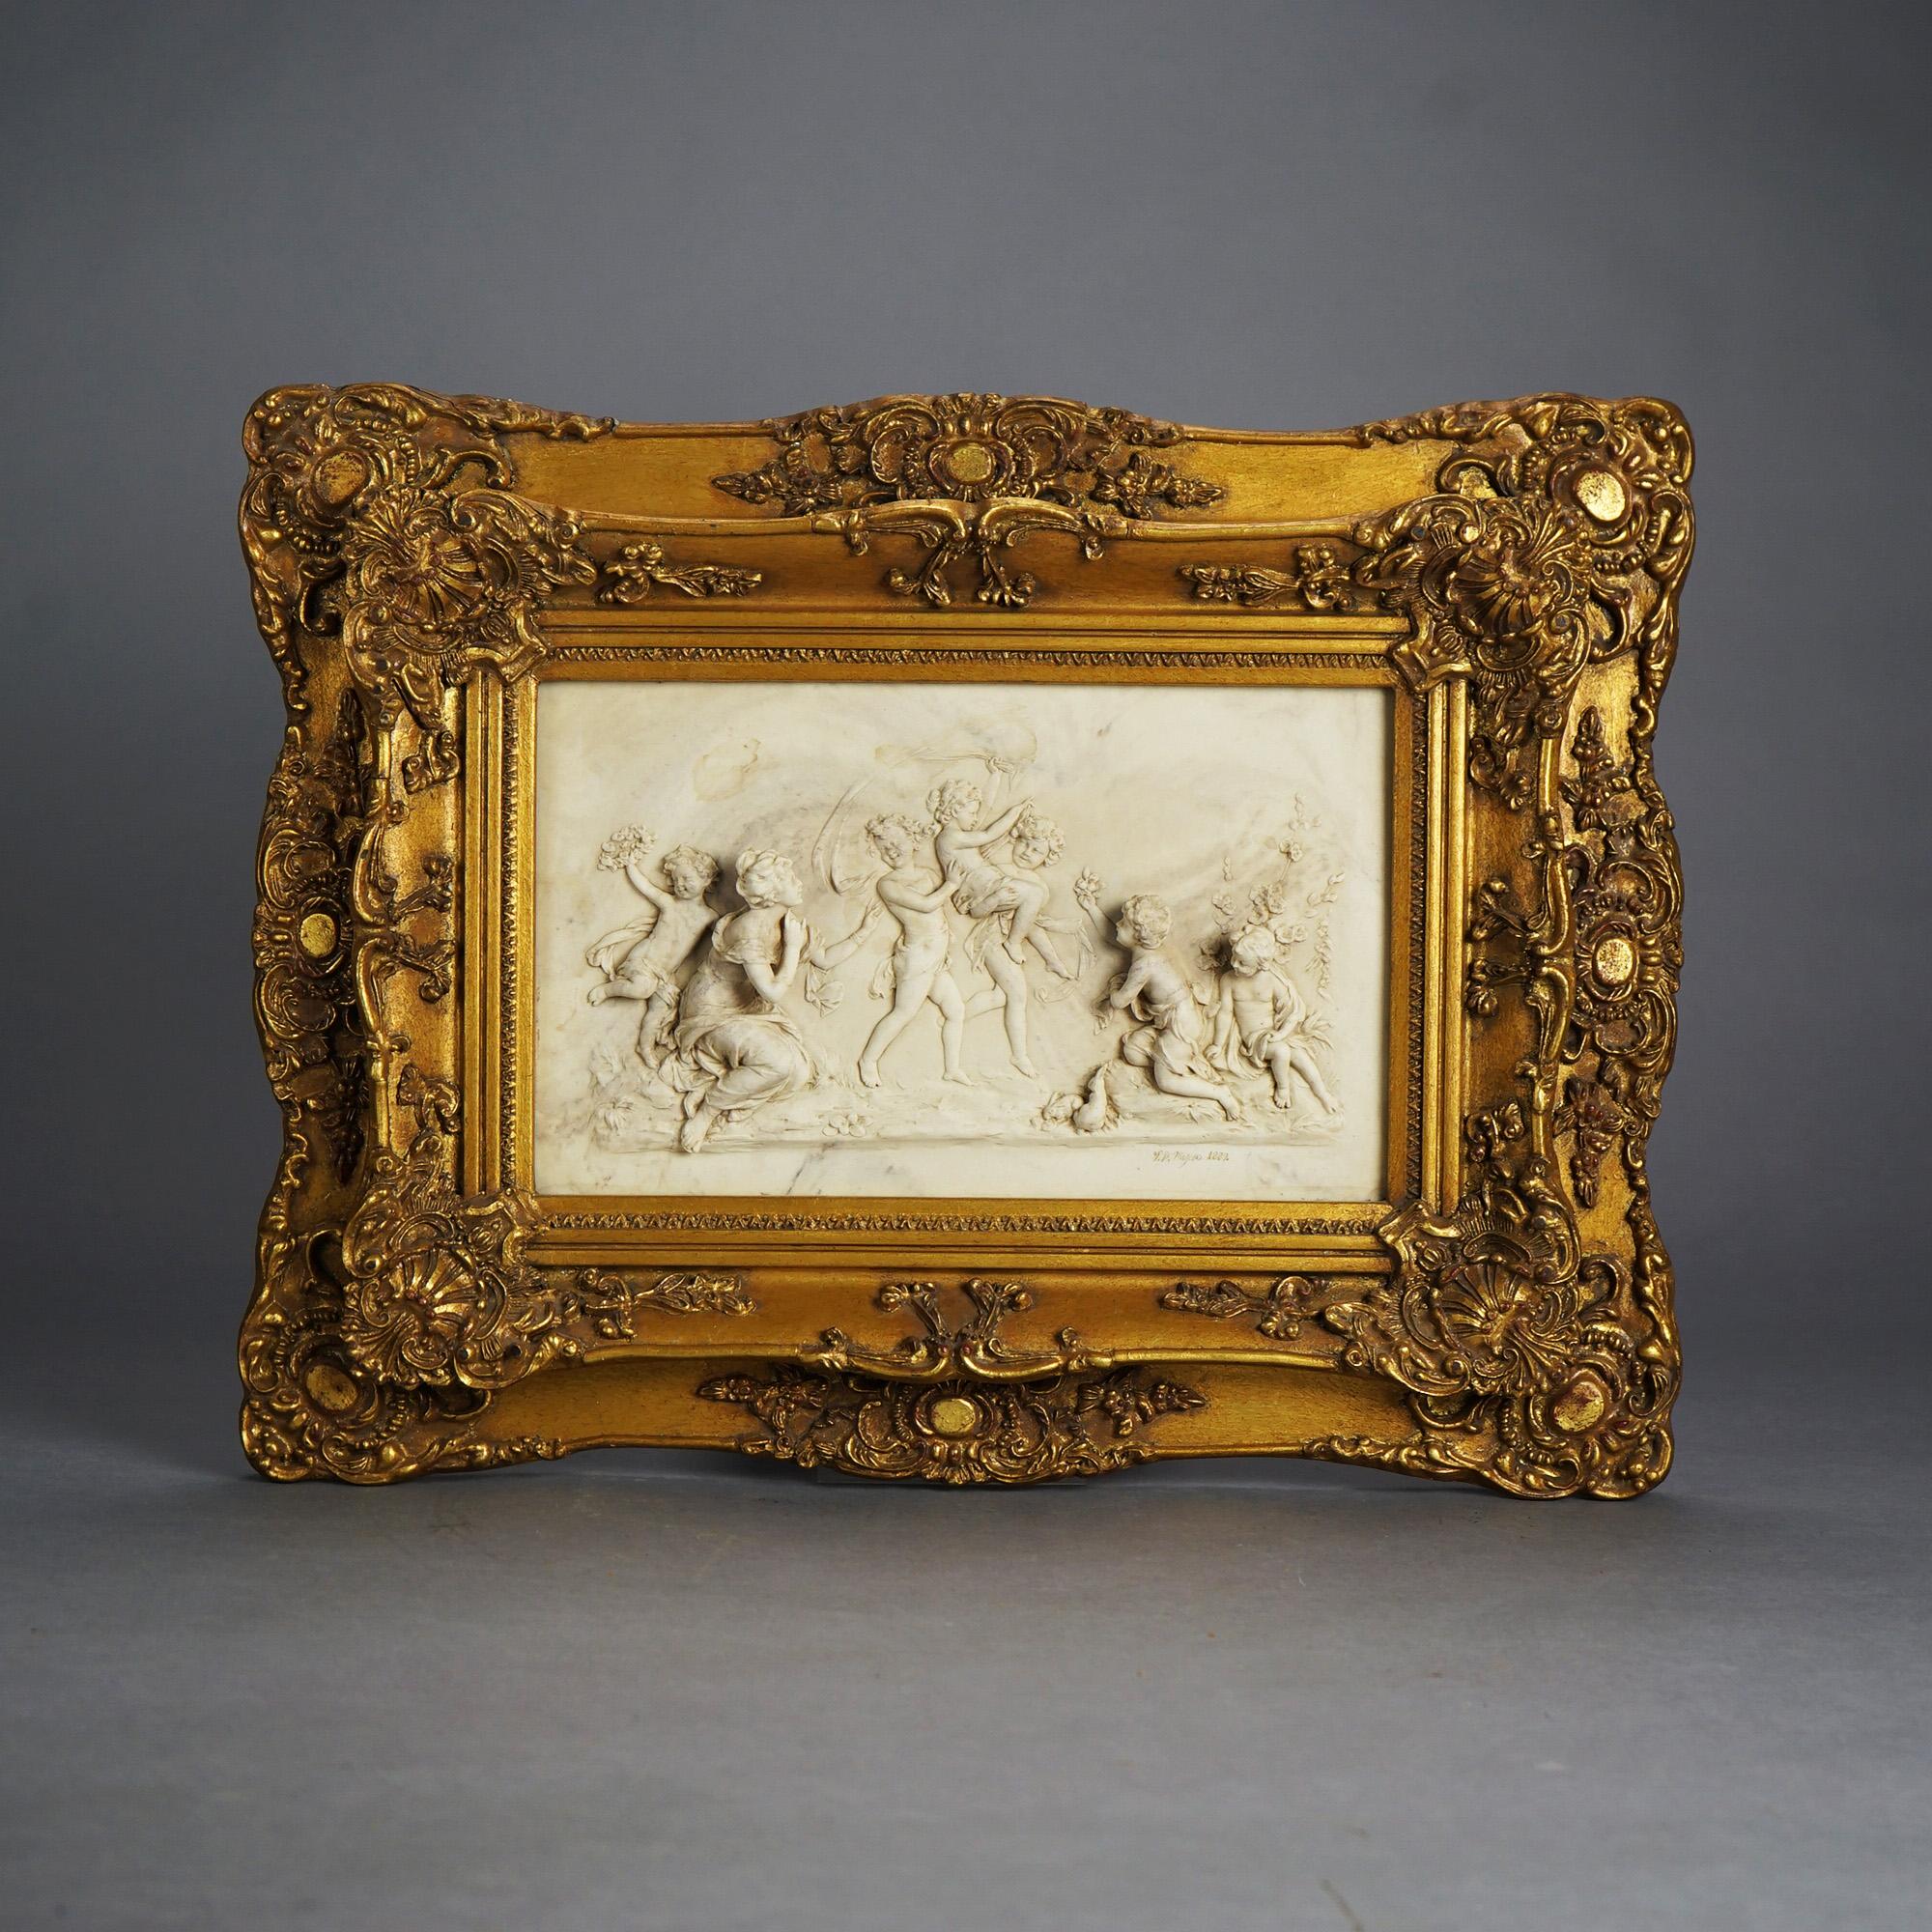 An antique Classical plaque offers carved marble cherub scene in high relief, signed as photographed, 19th C; more recent giltwood frame.

Measures - 16